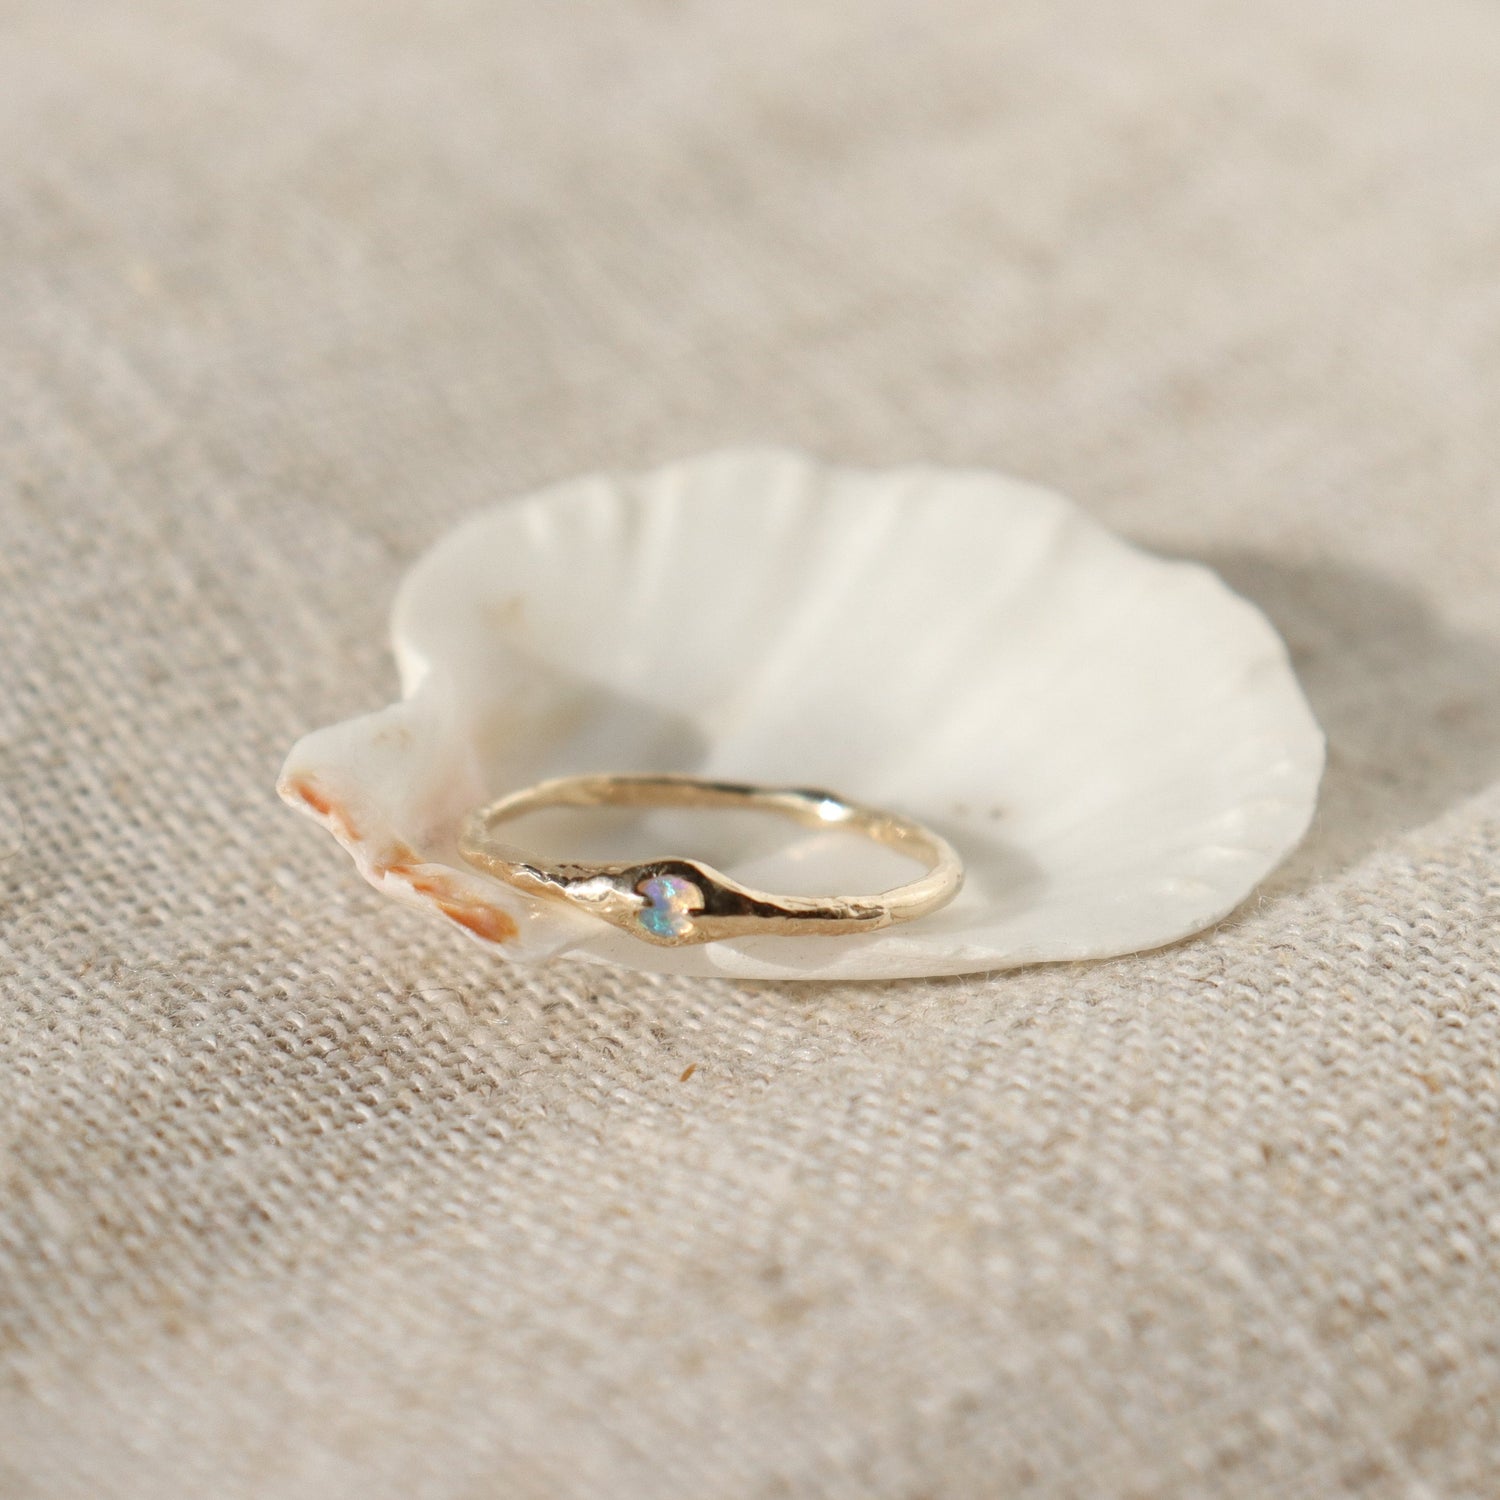 tiny opal stacking band set in a seashell